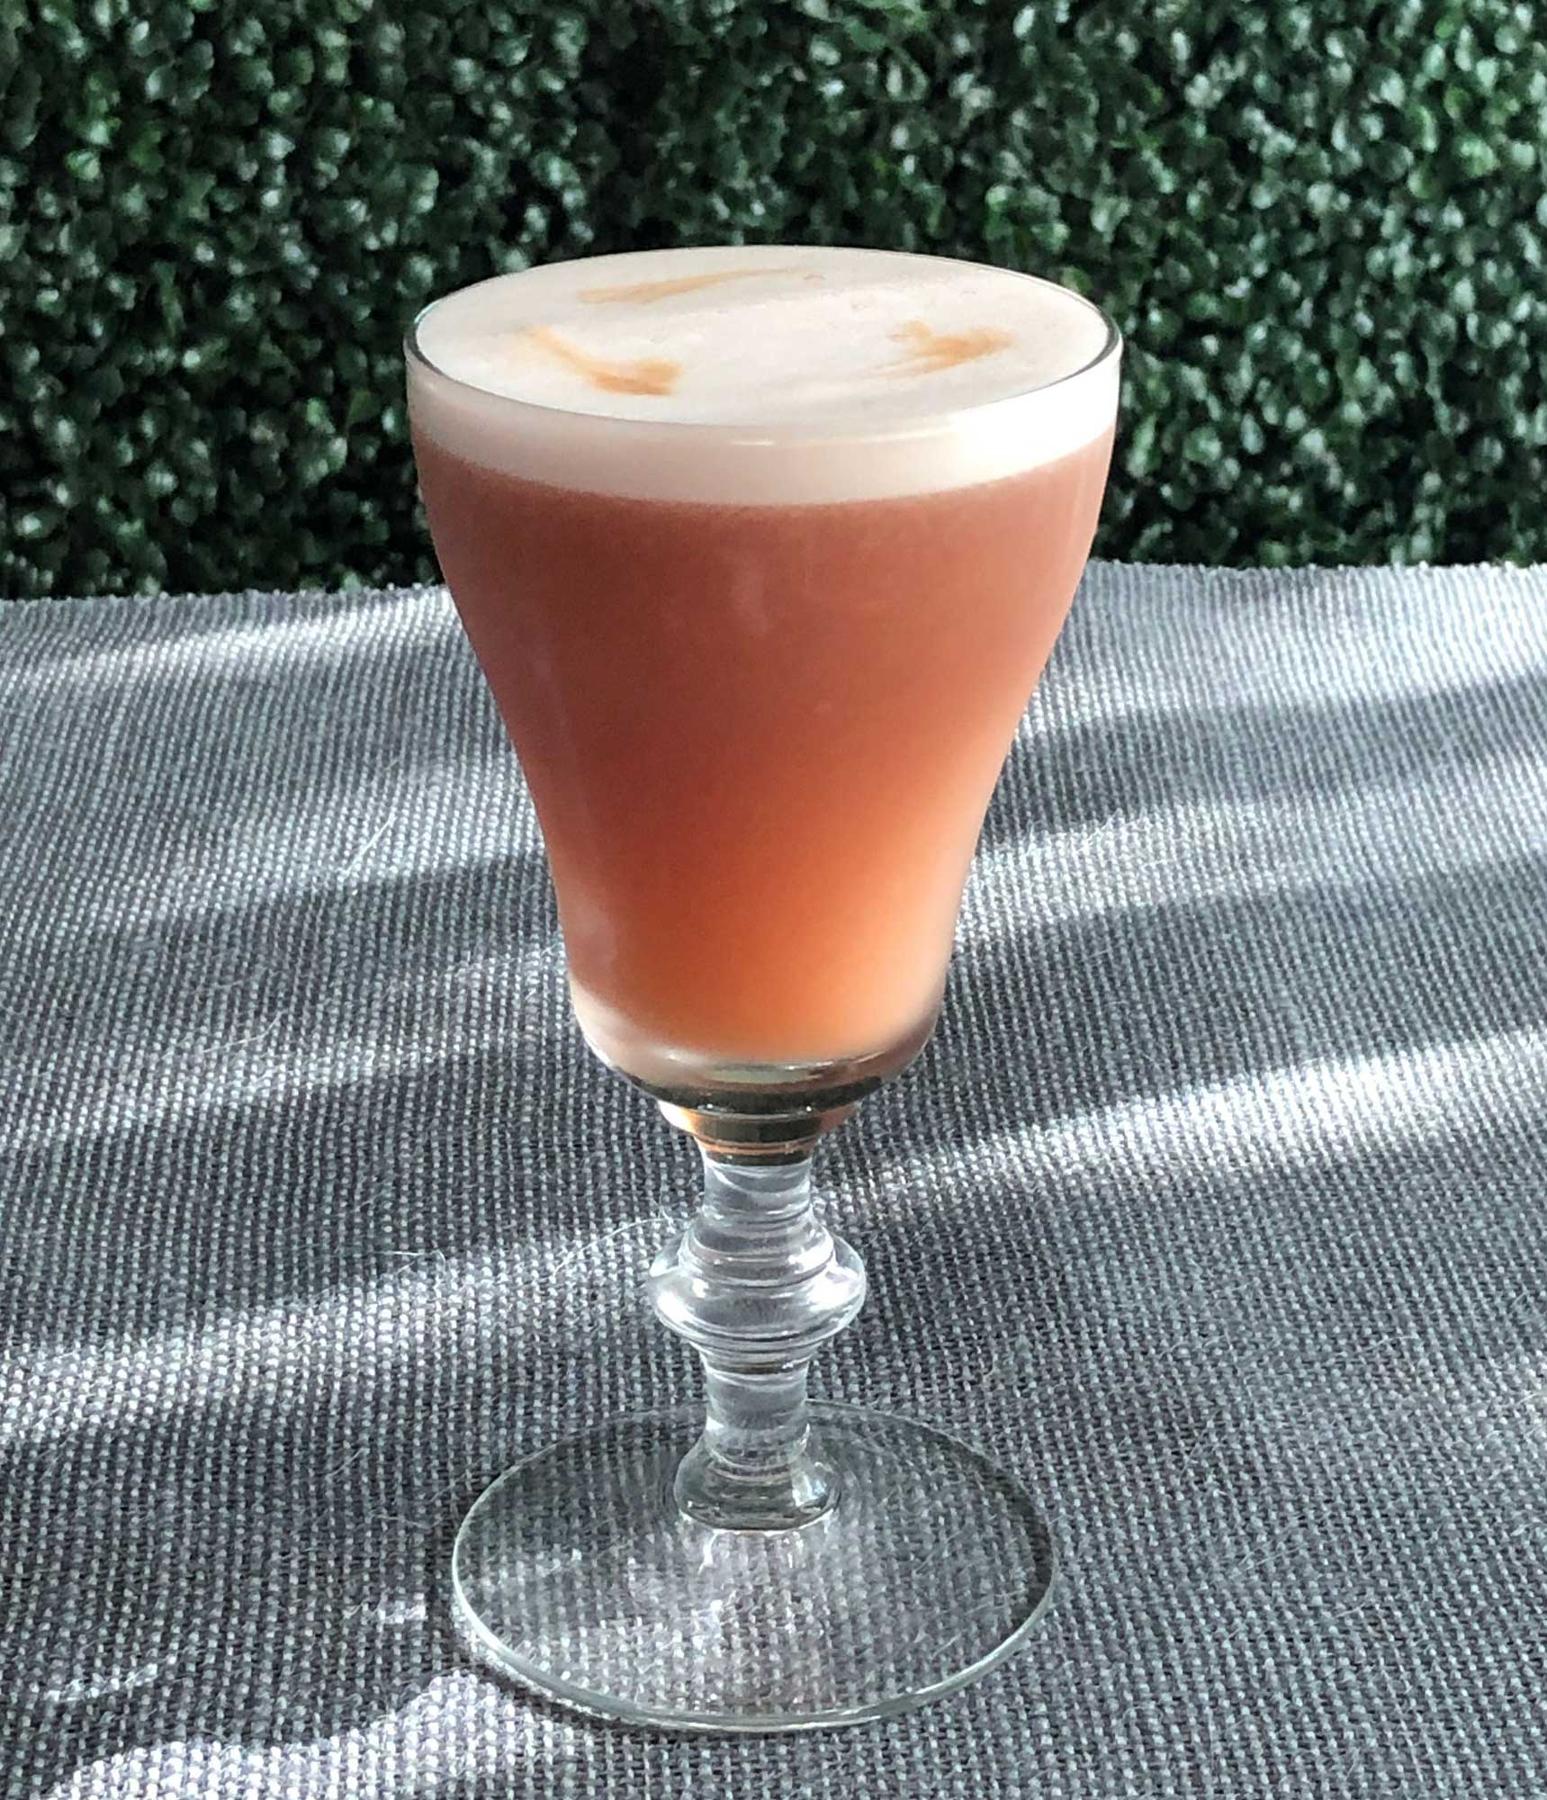 An example of the Damson-Pisco Sour, the mixed drink (drink) featuring Averell Damson Plum Gin Liqueur, pisco, egg white, lime juice, agave nectar, and Amargo Chuncho; photo by Lee Edwards